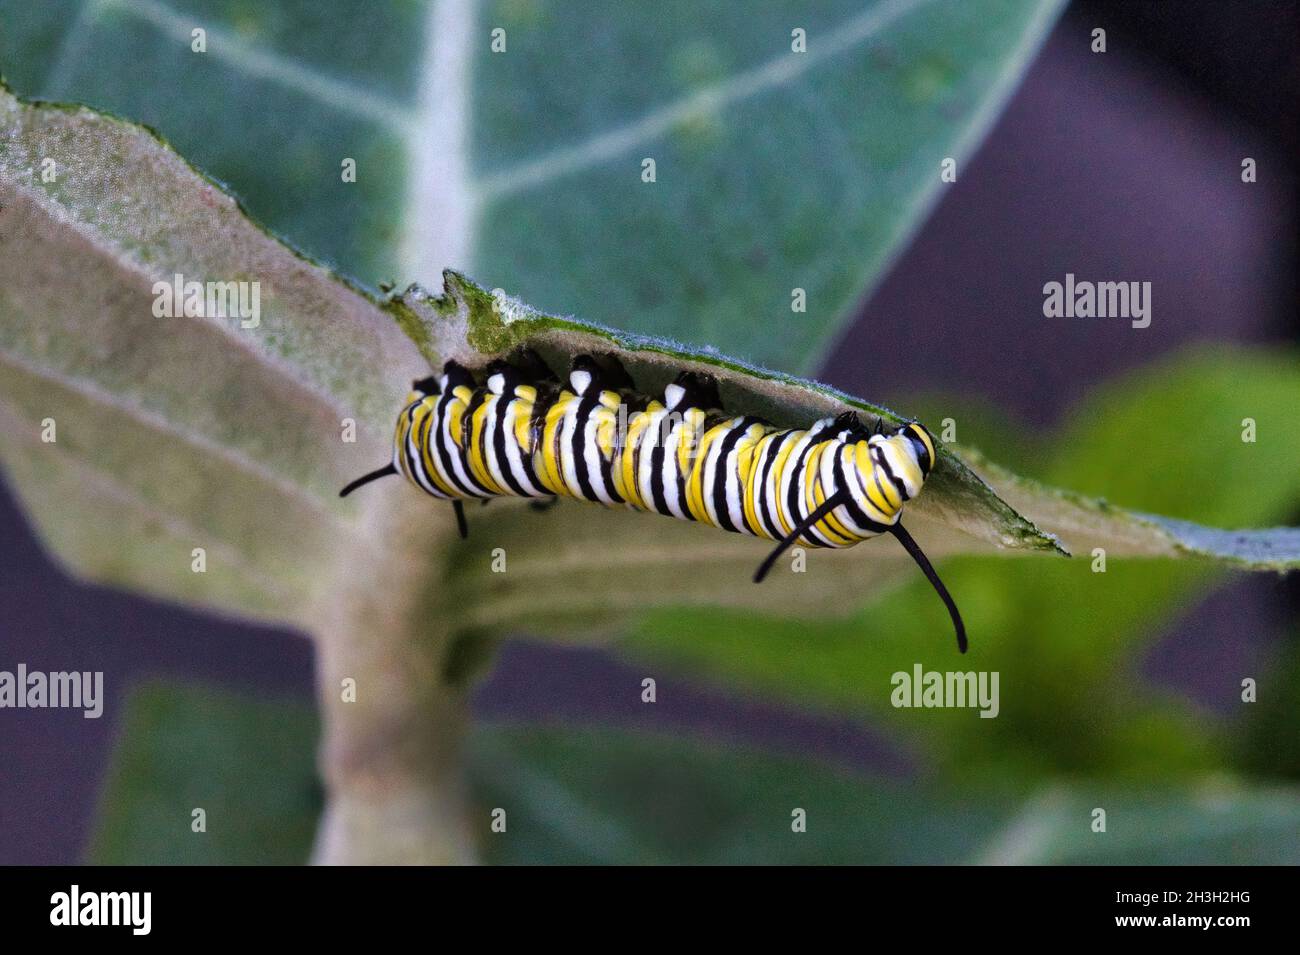 Monarch catepillar voraciously eating from a milkweed plant. Stock Photo